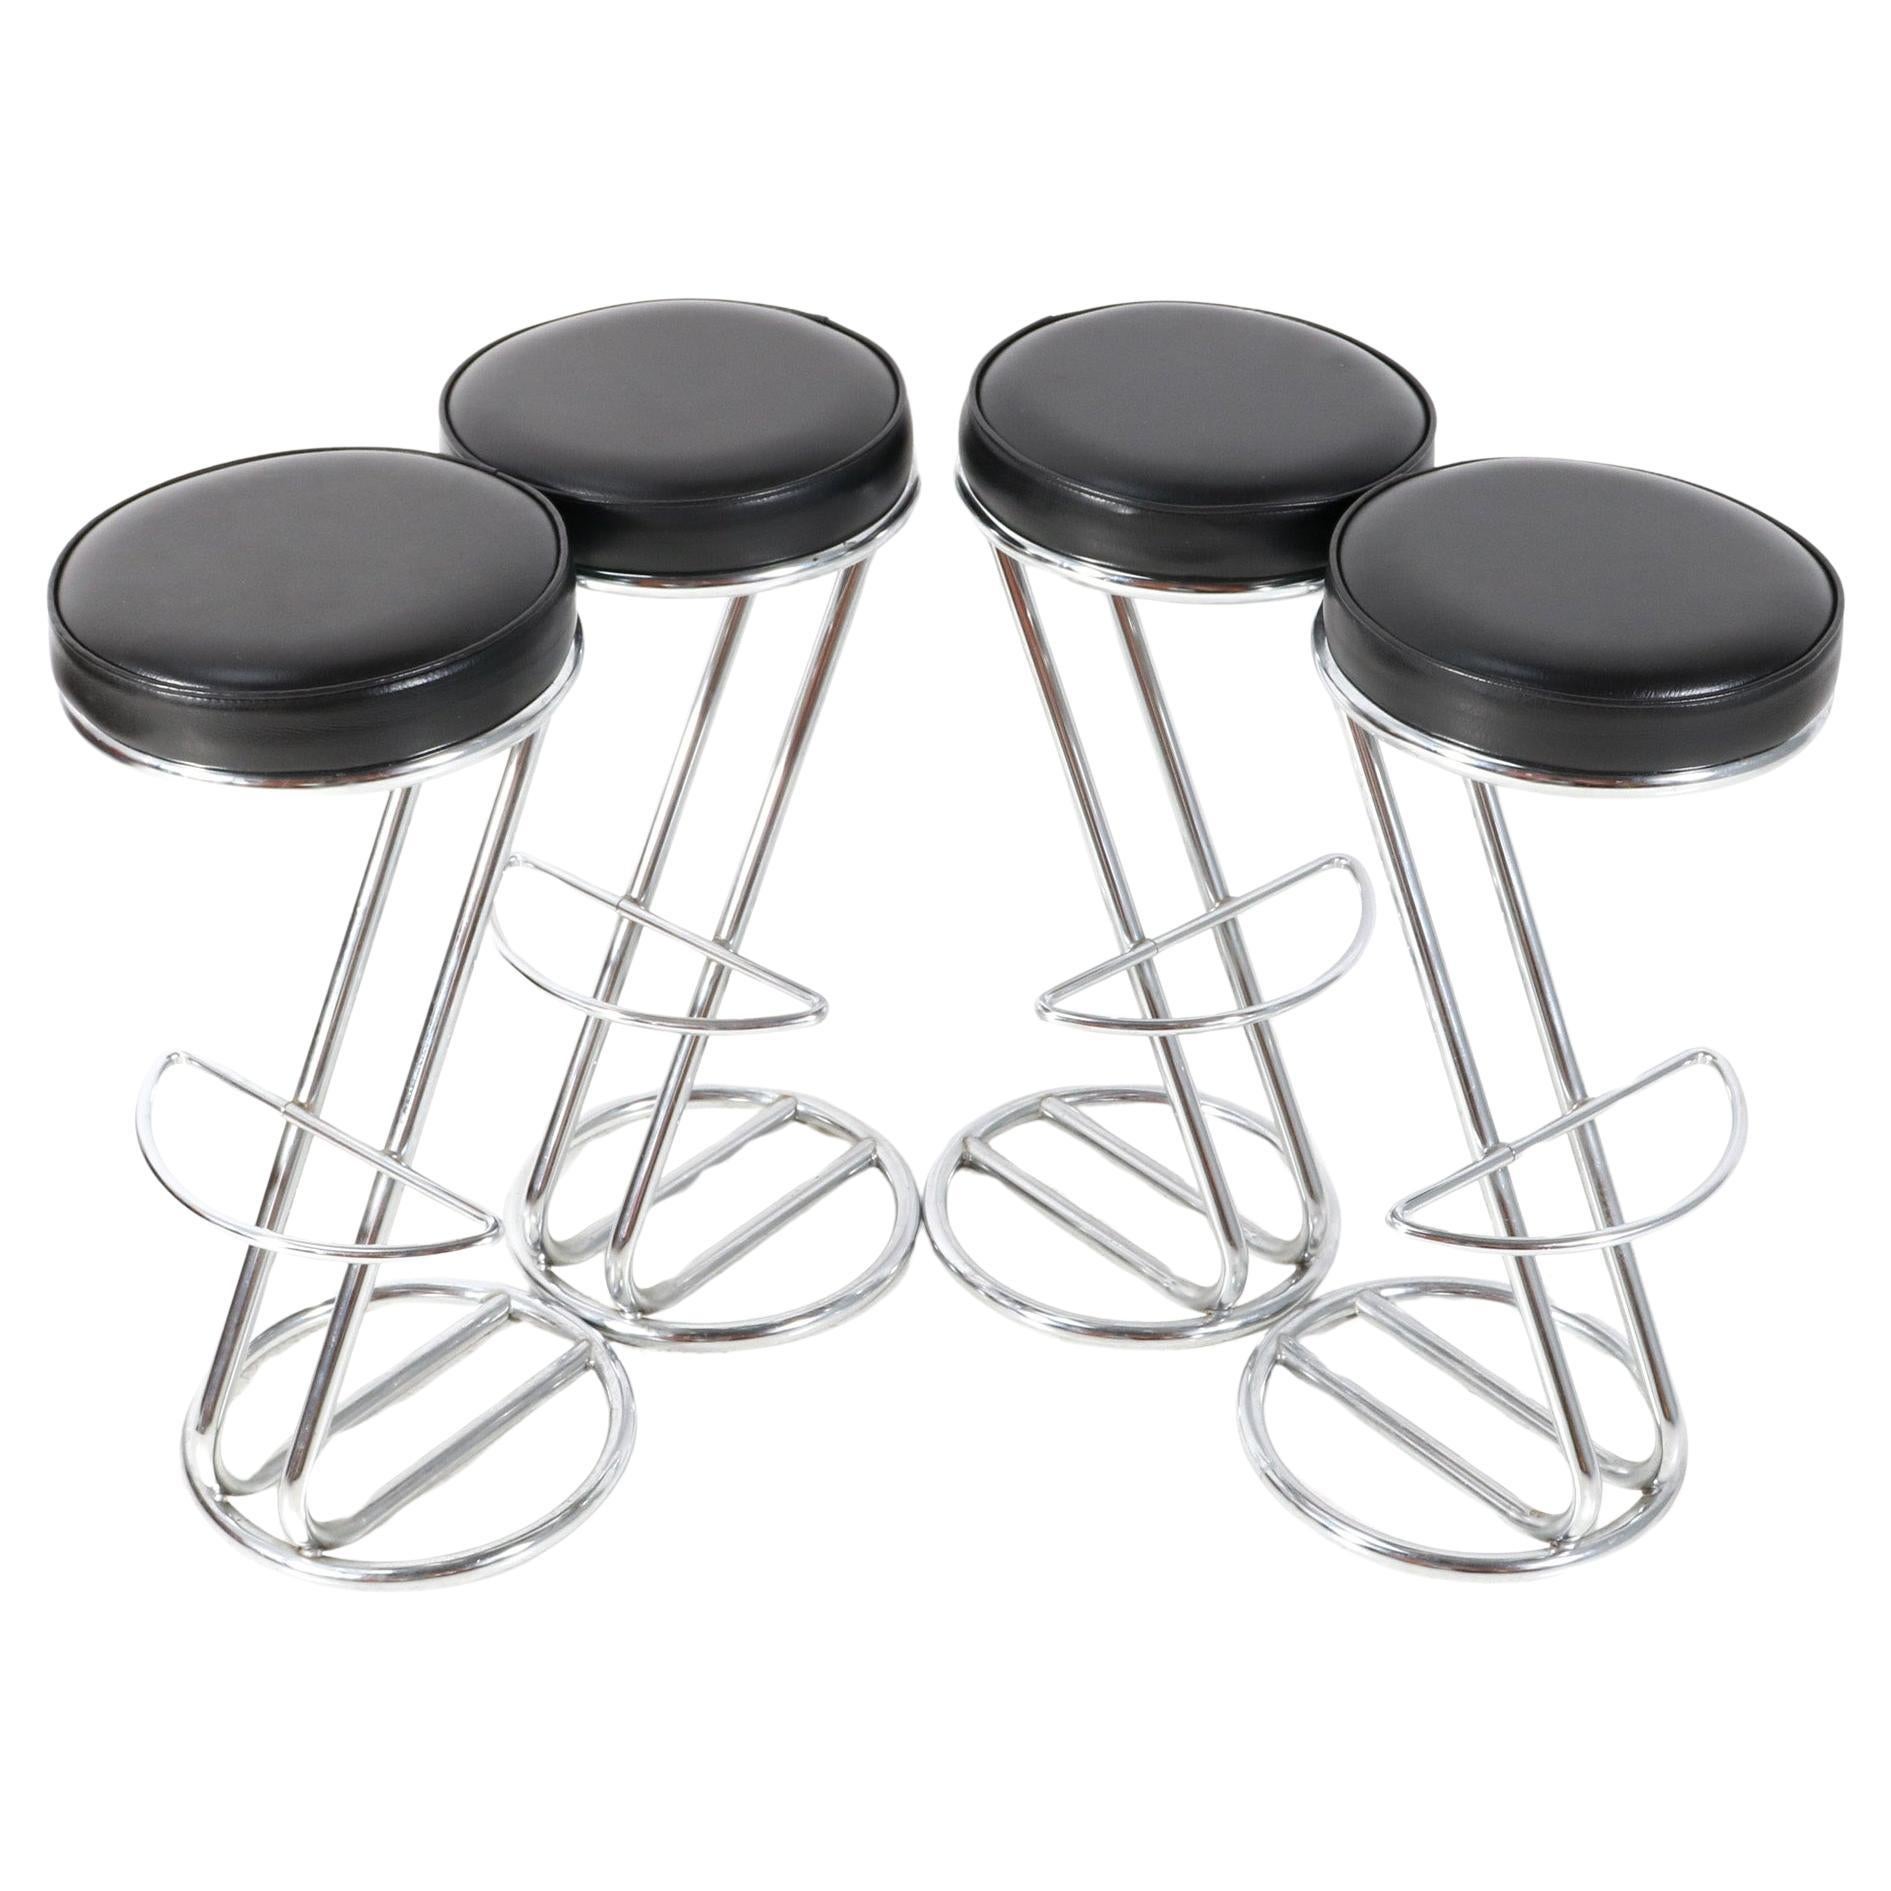 Four Chrome and Faux Leather Mid-Century Modern Barstools, 1970s For Sale